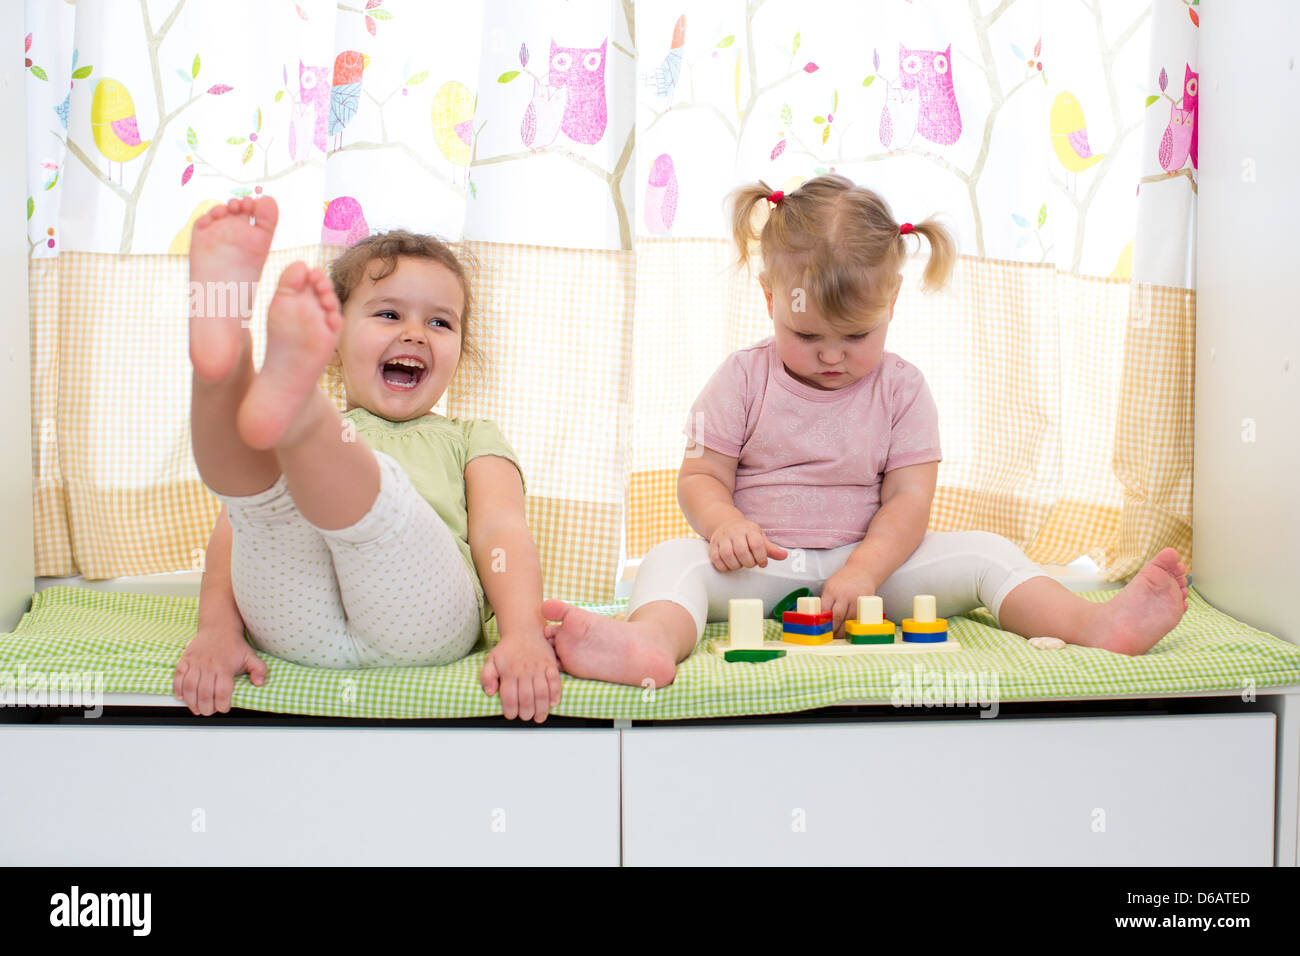 children sisters play together indoors Stock Photo